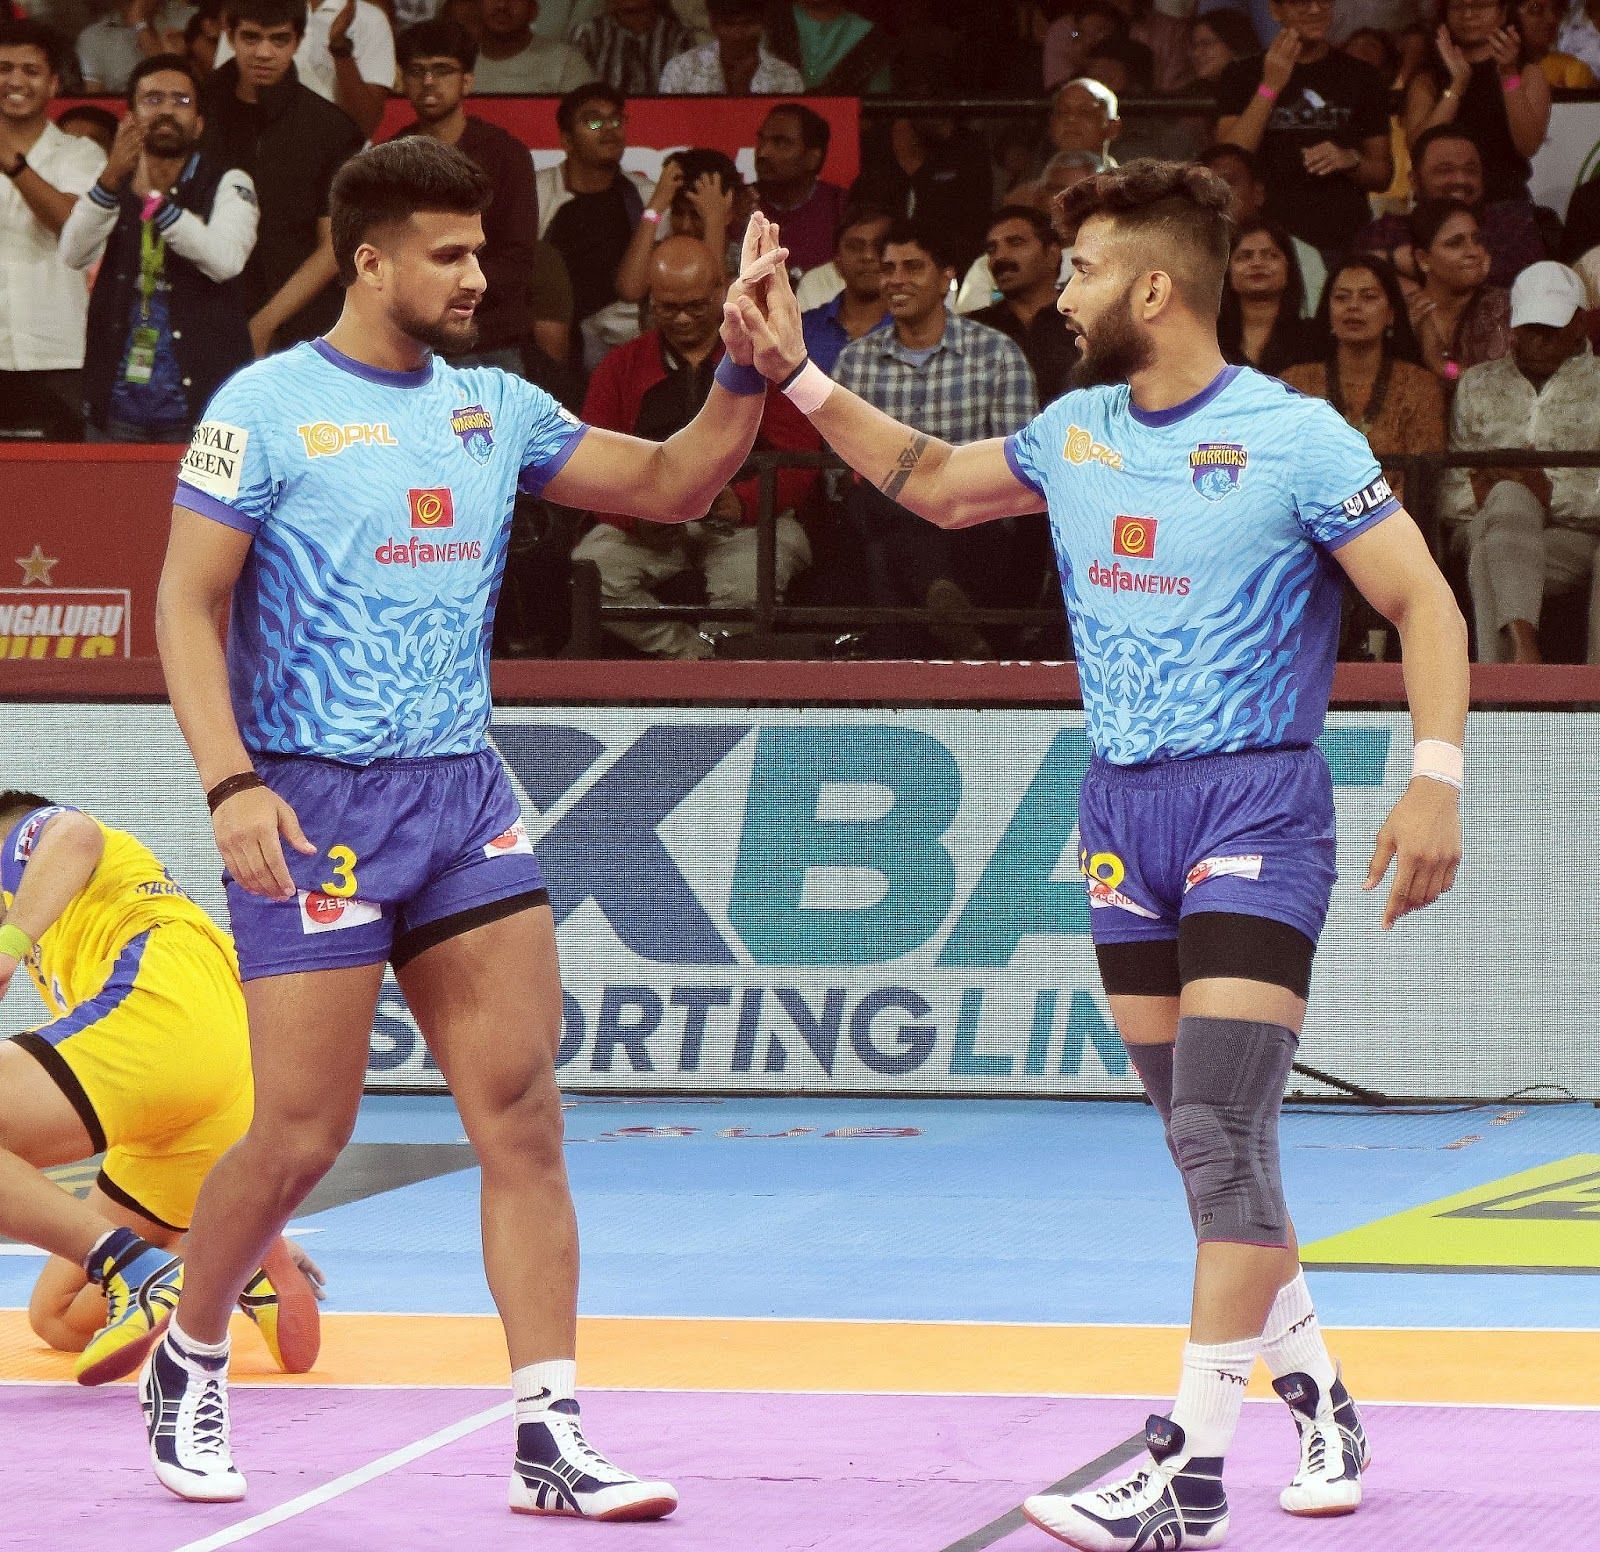 Shubham Shinde (right) with a high-five to teammate (Credits: PKL)